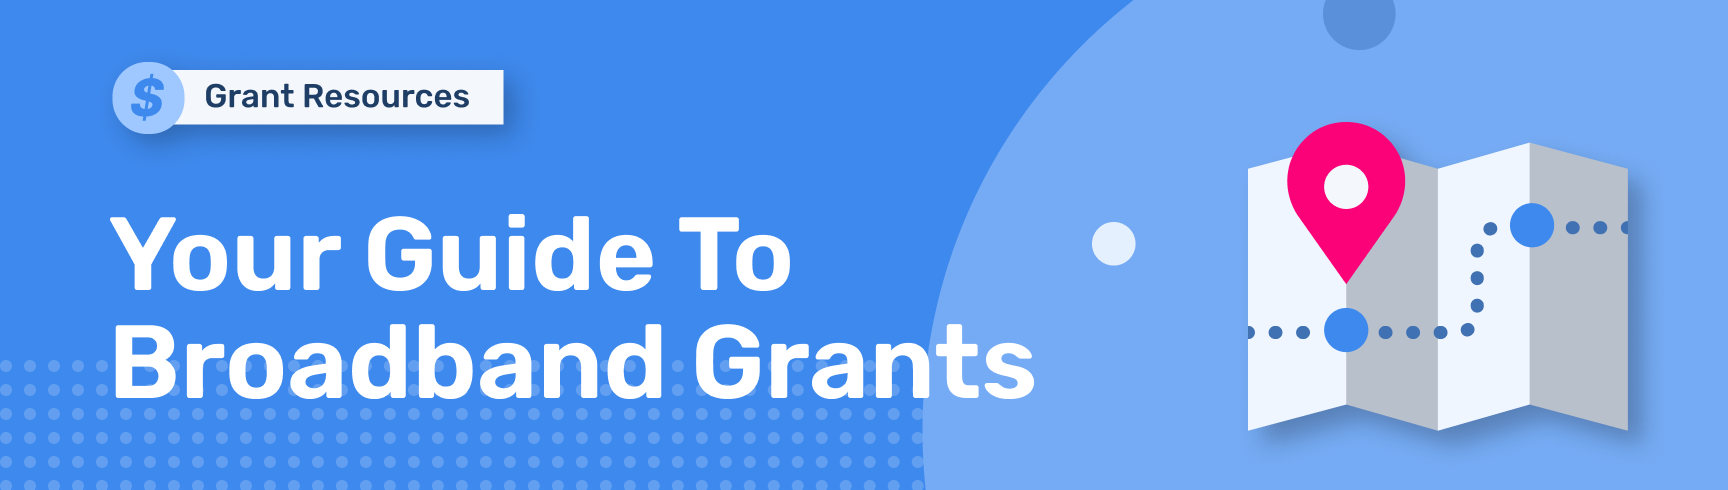 Your Guide To Broadband Grants Banner Image